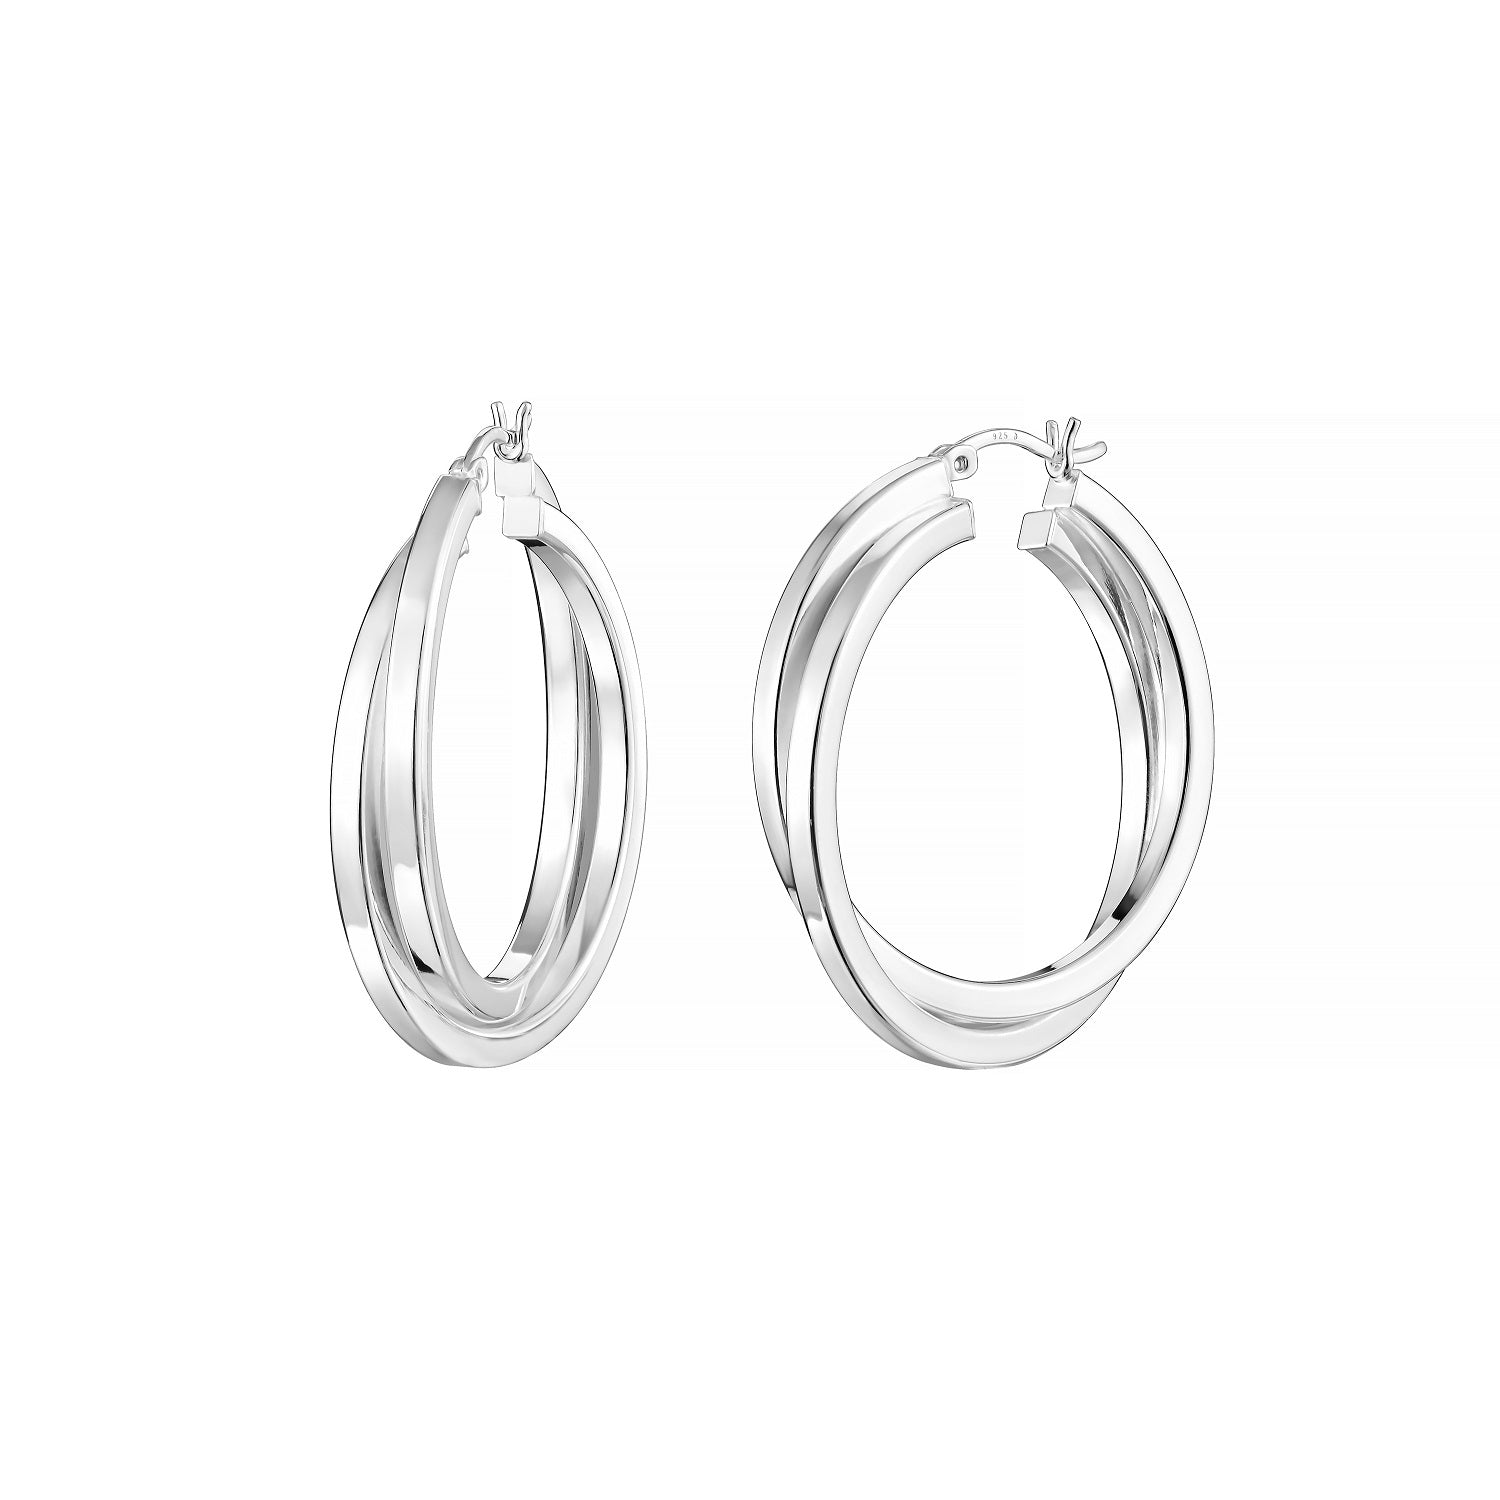 925 STERLING SILVER 35.0 MM. DOUBLE CROSSOVER SQUARE TUBE HOOP EARRINGS F70218